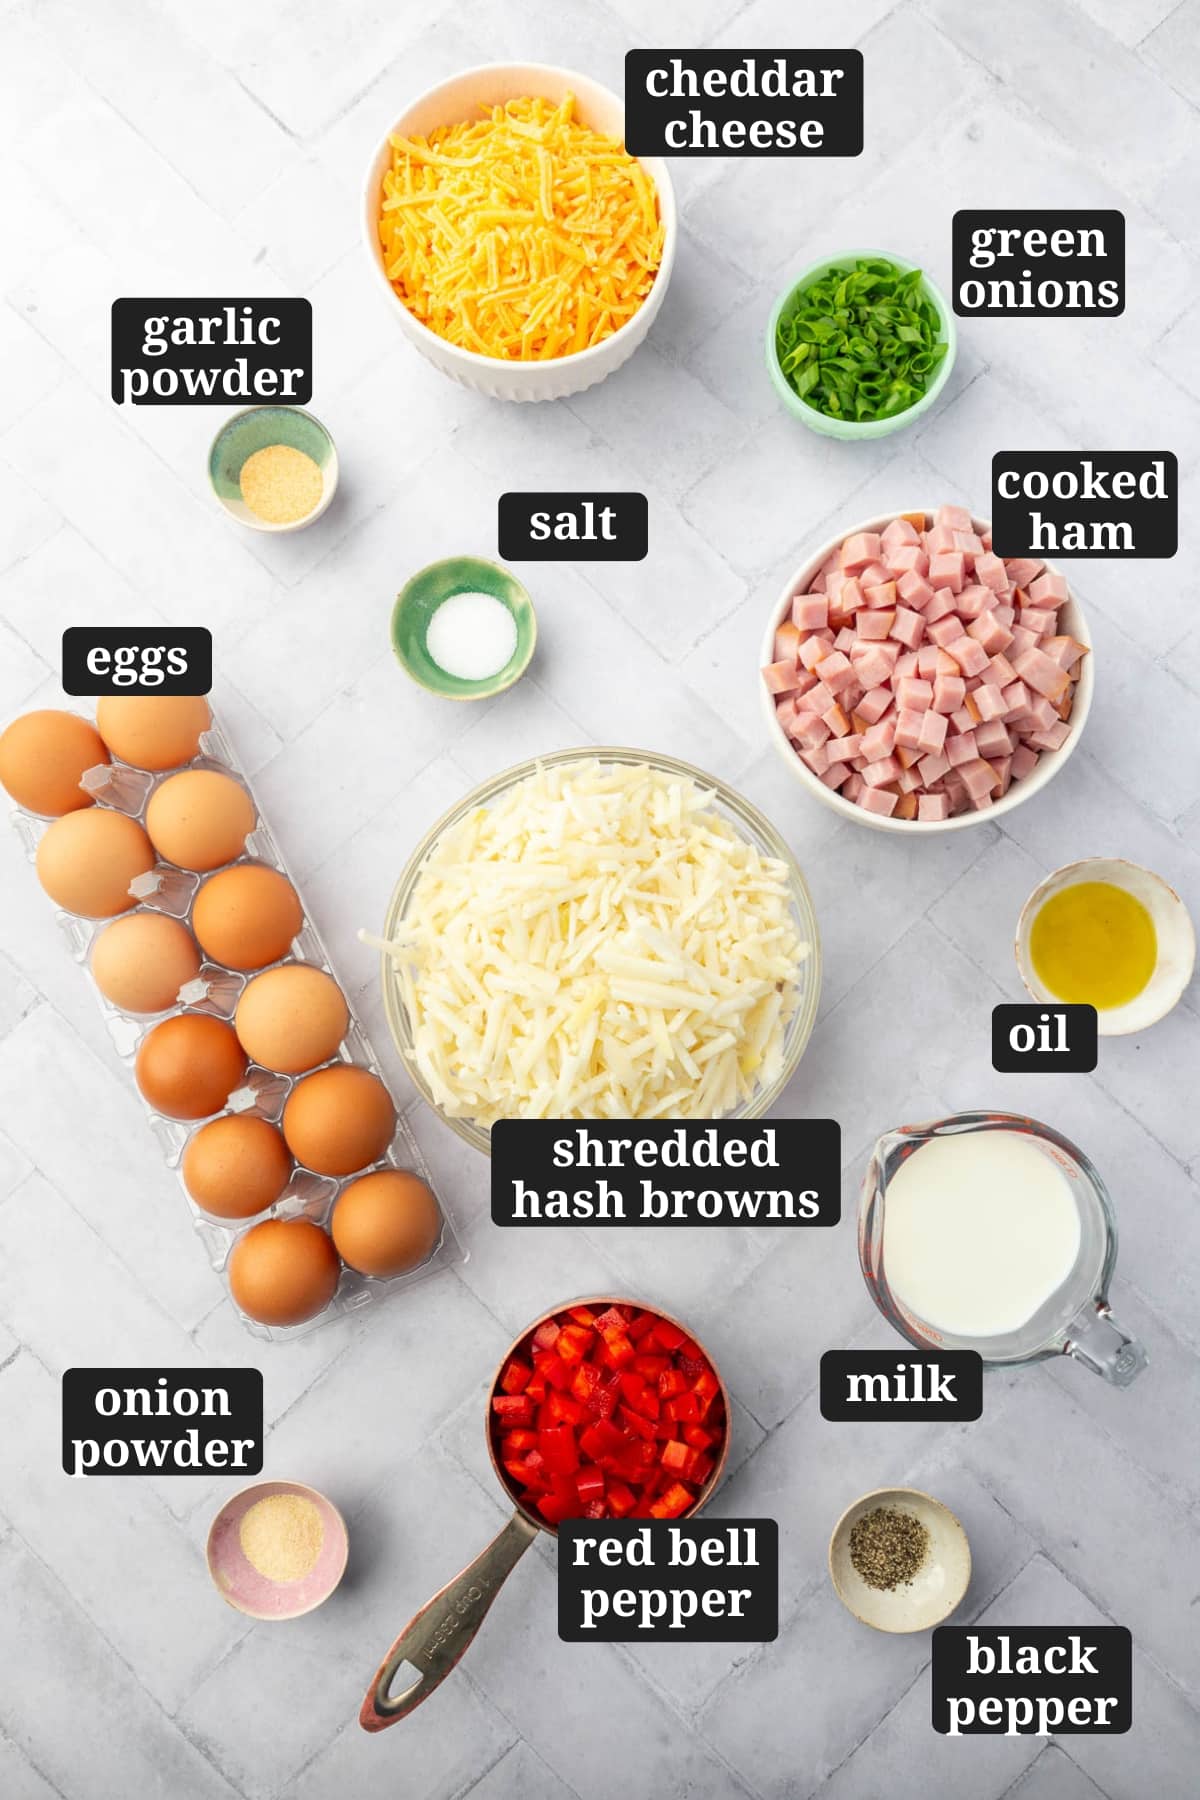 An overhead view of ingredients to make gluten free breakfast casserole including cheddar green, green onions, garlic powder, salt, cooked ham, eggs, shredded hash browns, oil, milk, red bell pepper, black pepper and onion powder with text overlays over each ingredient.